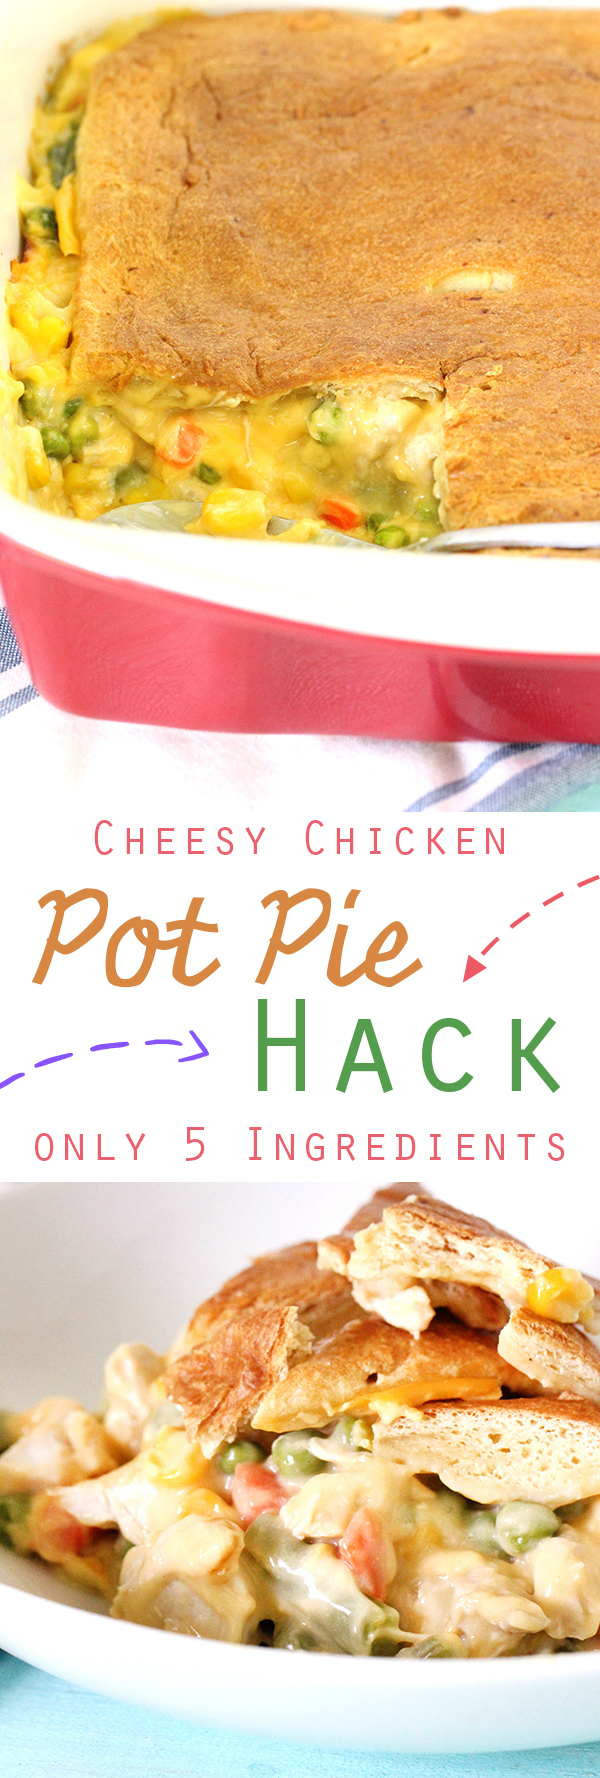 Cheesy Chicken Pot Pie Hack. Only 5 ingredients & 20 minutes in the oven. Woot.